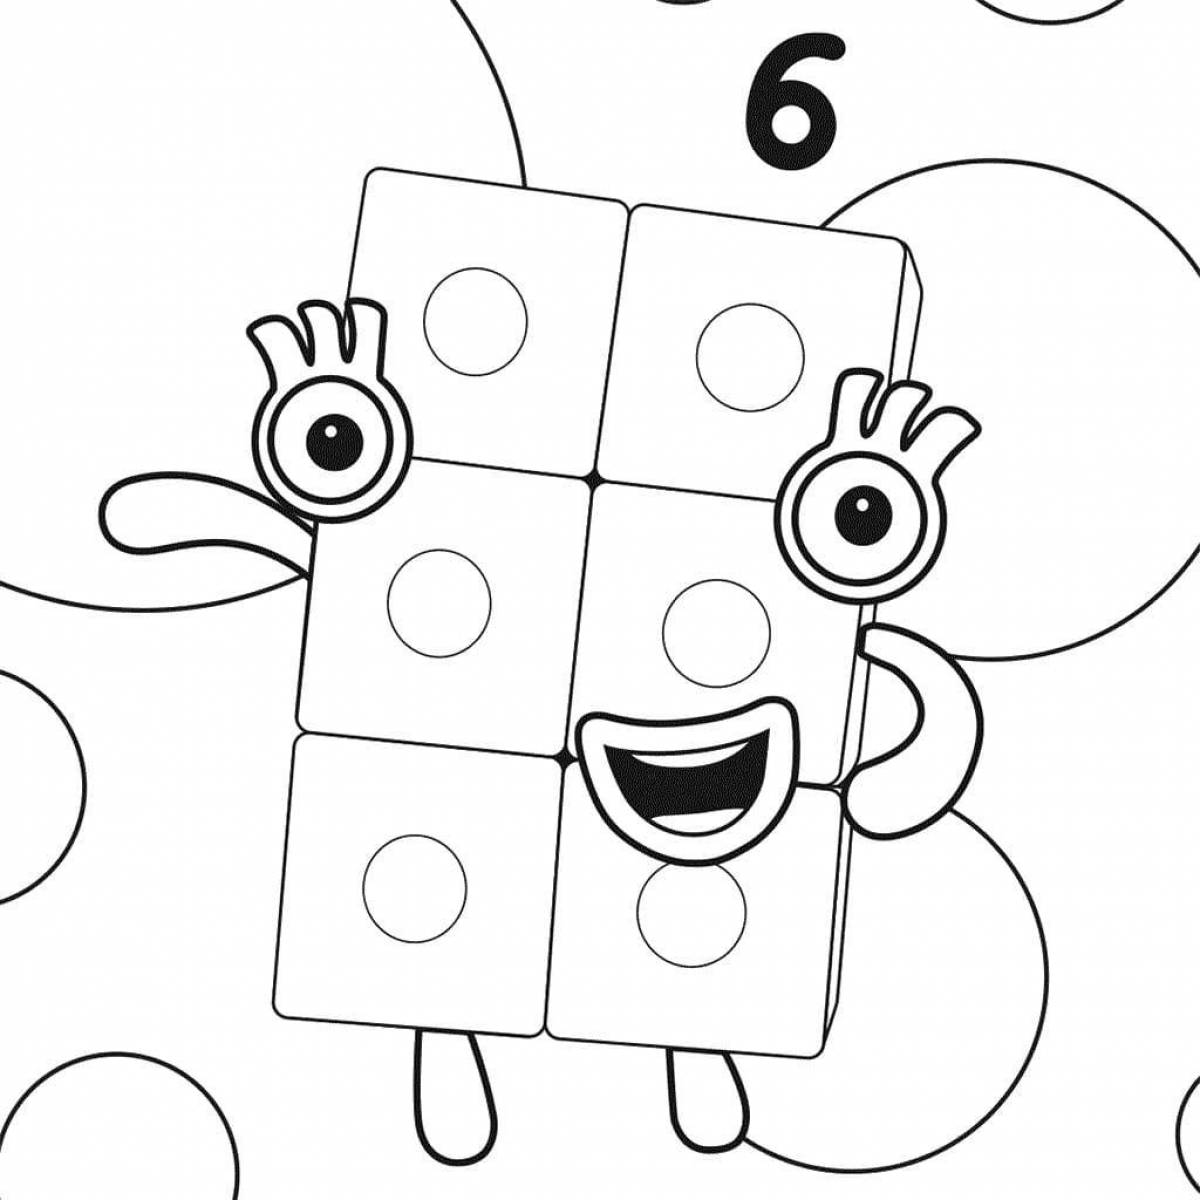 Exciting coloring numberblocks